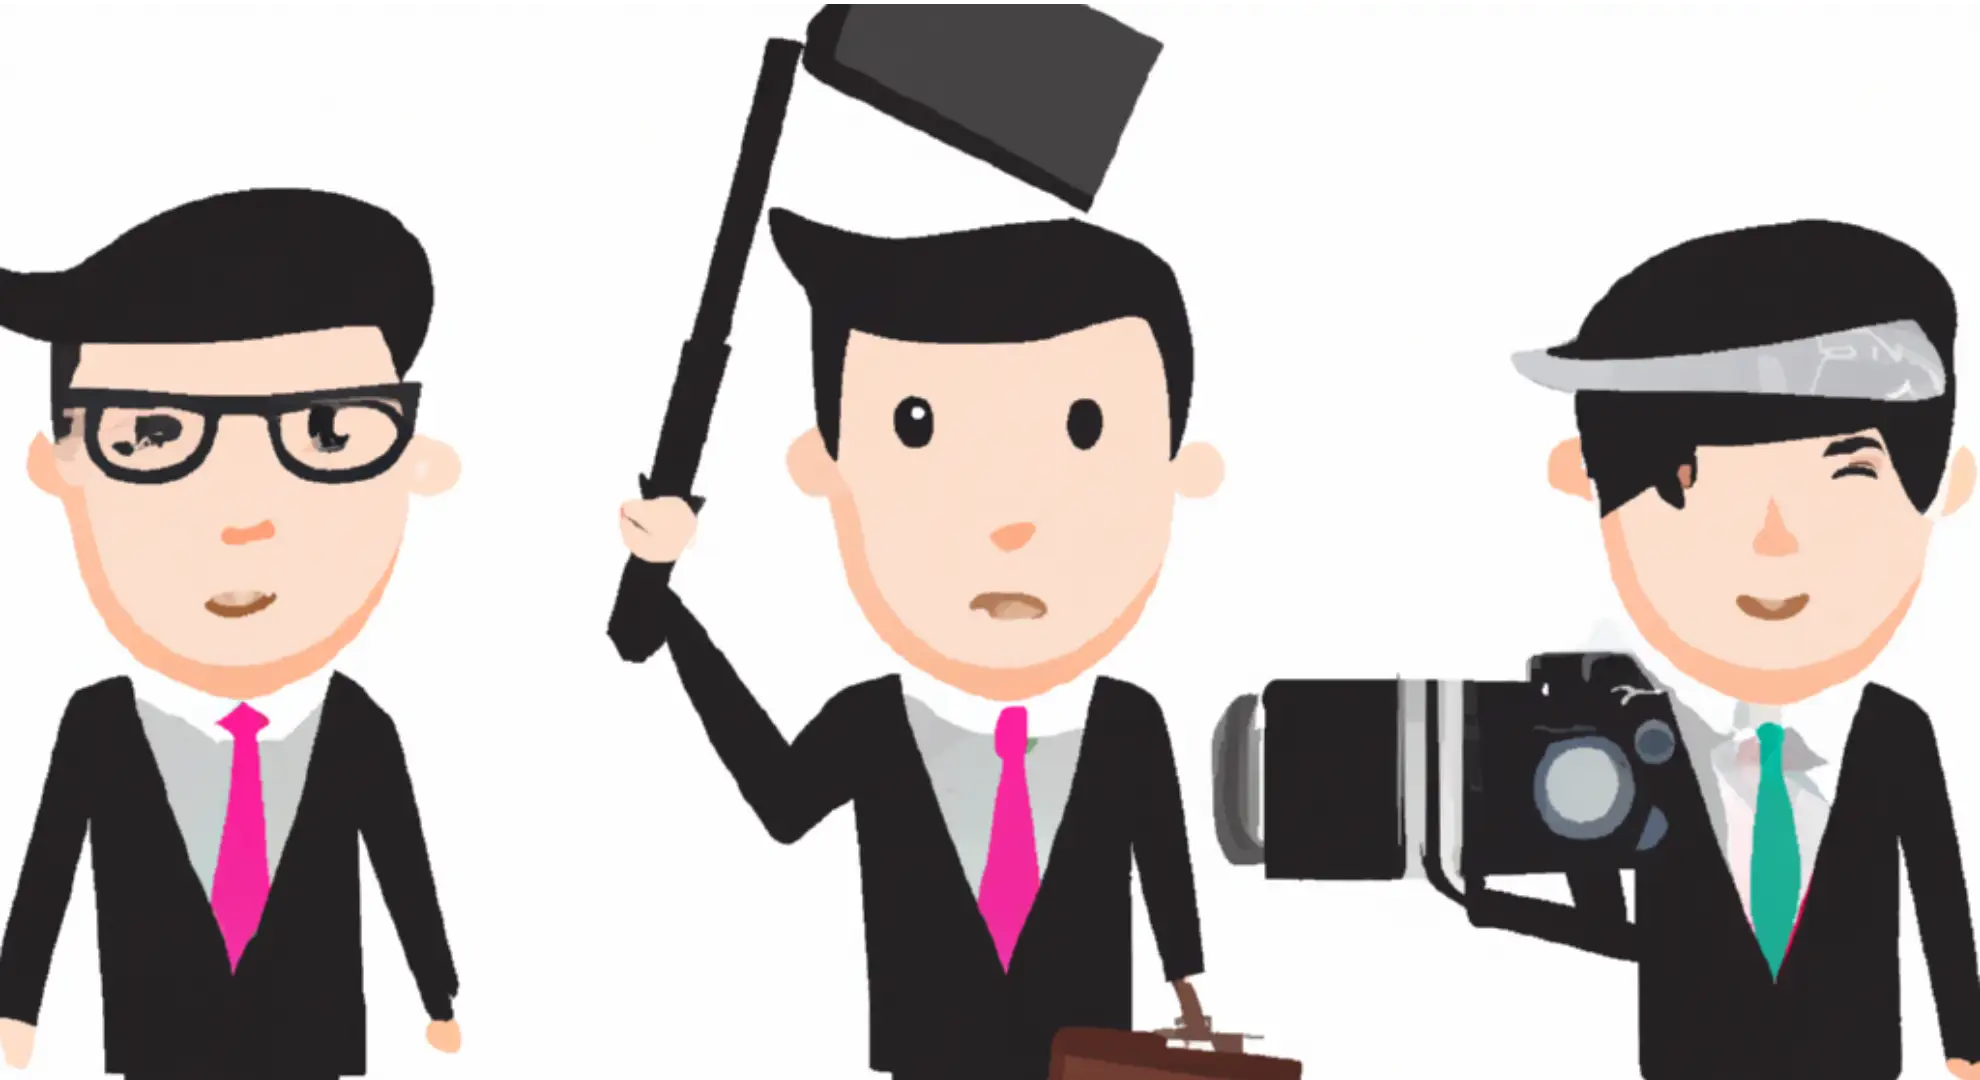 How to get film production lawyer jobs